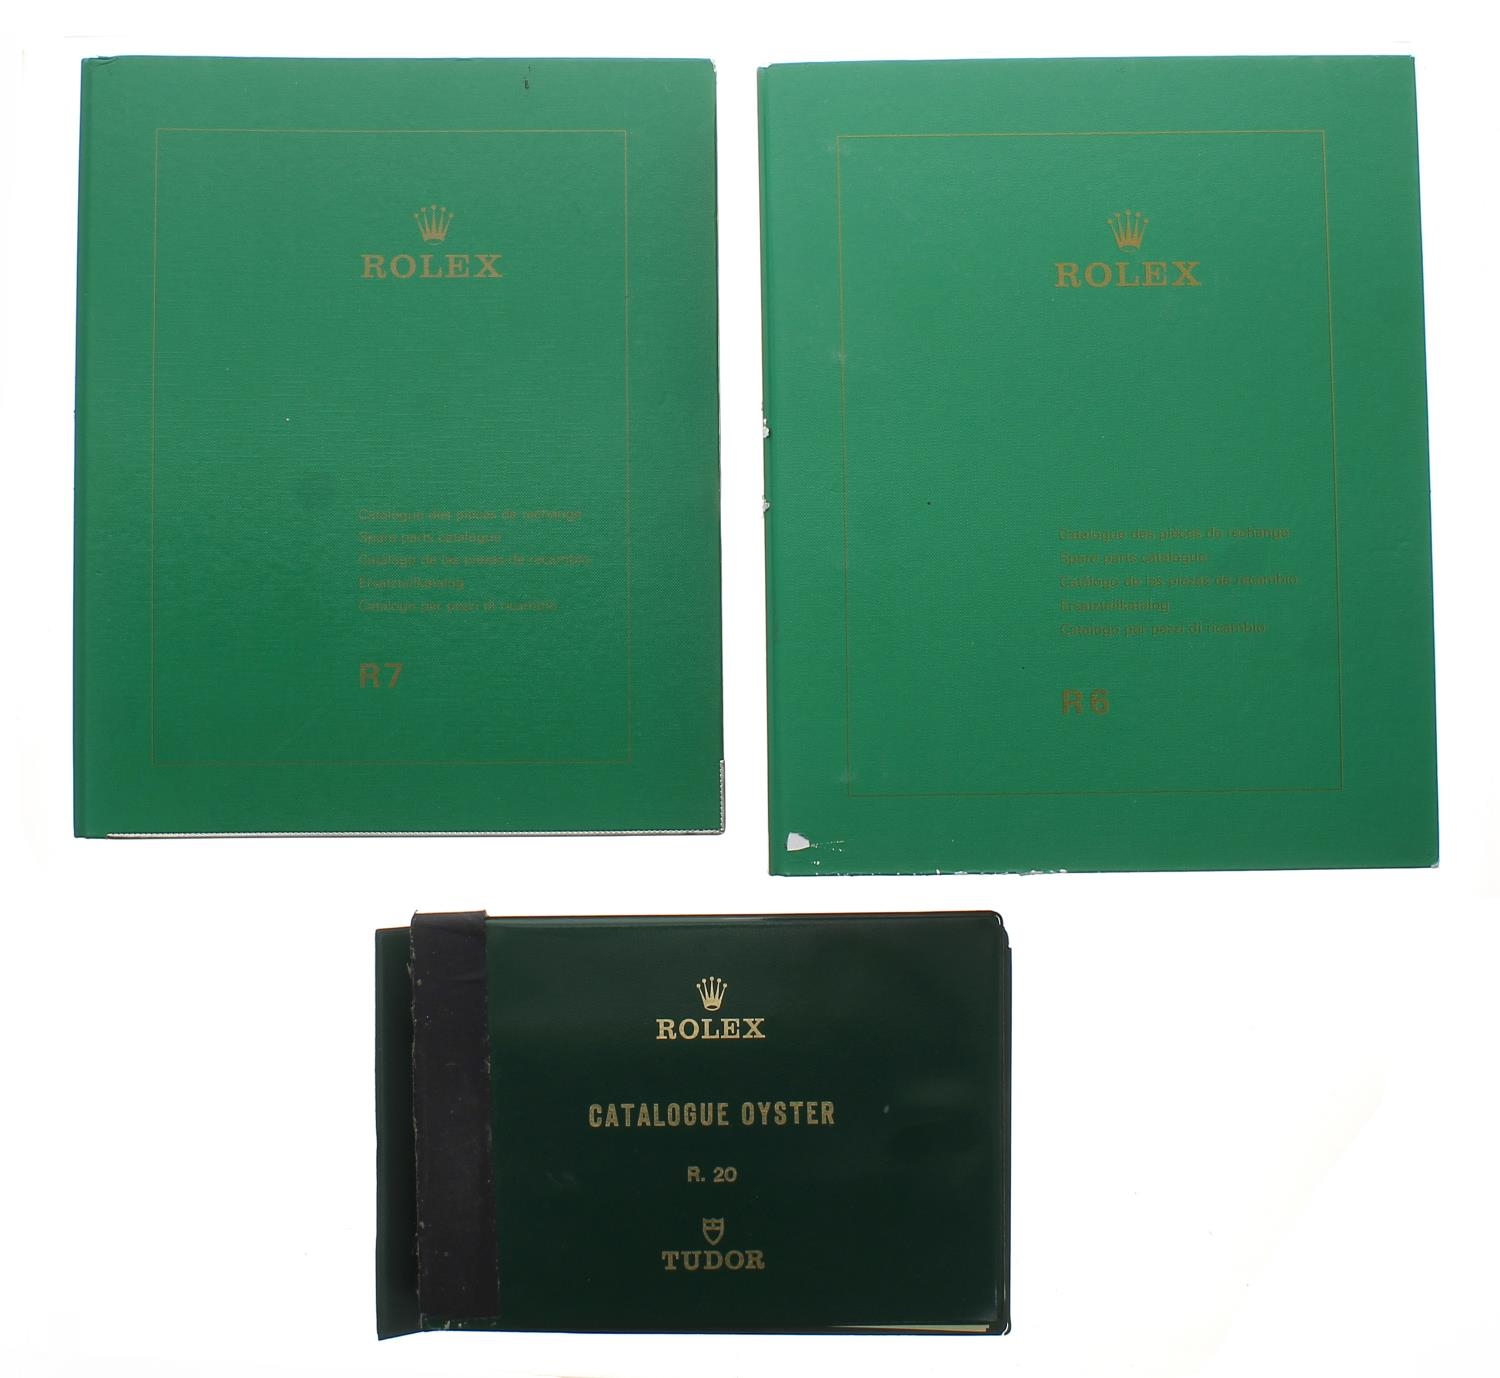 Rolex - Rolex Catalogue Oyster R.20 Tudor parts catalogue within a branded green vinyl ring